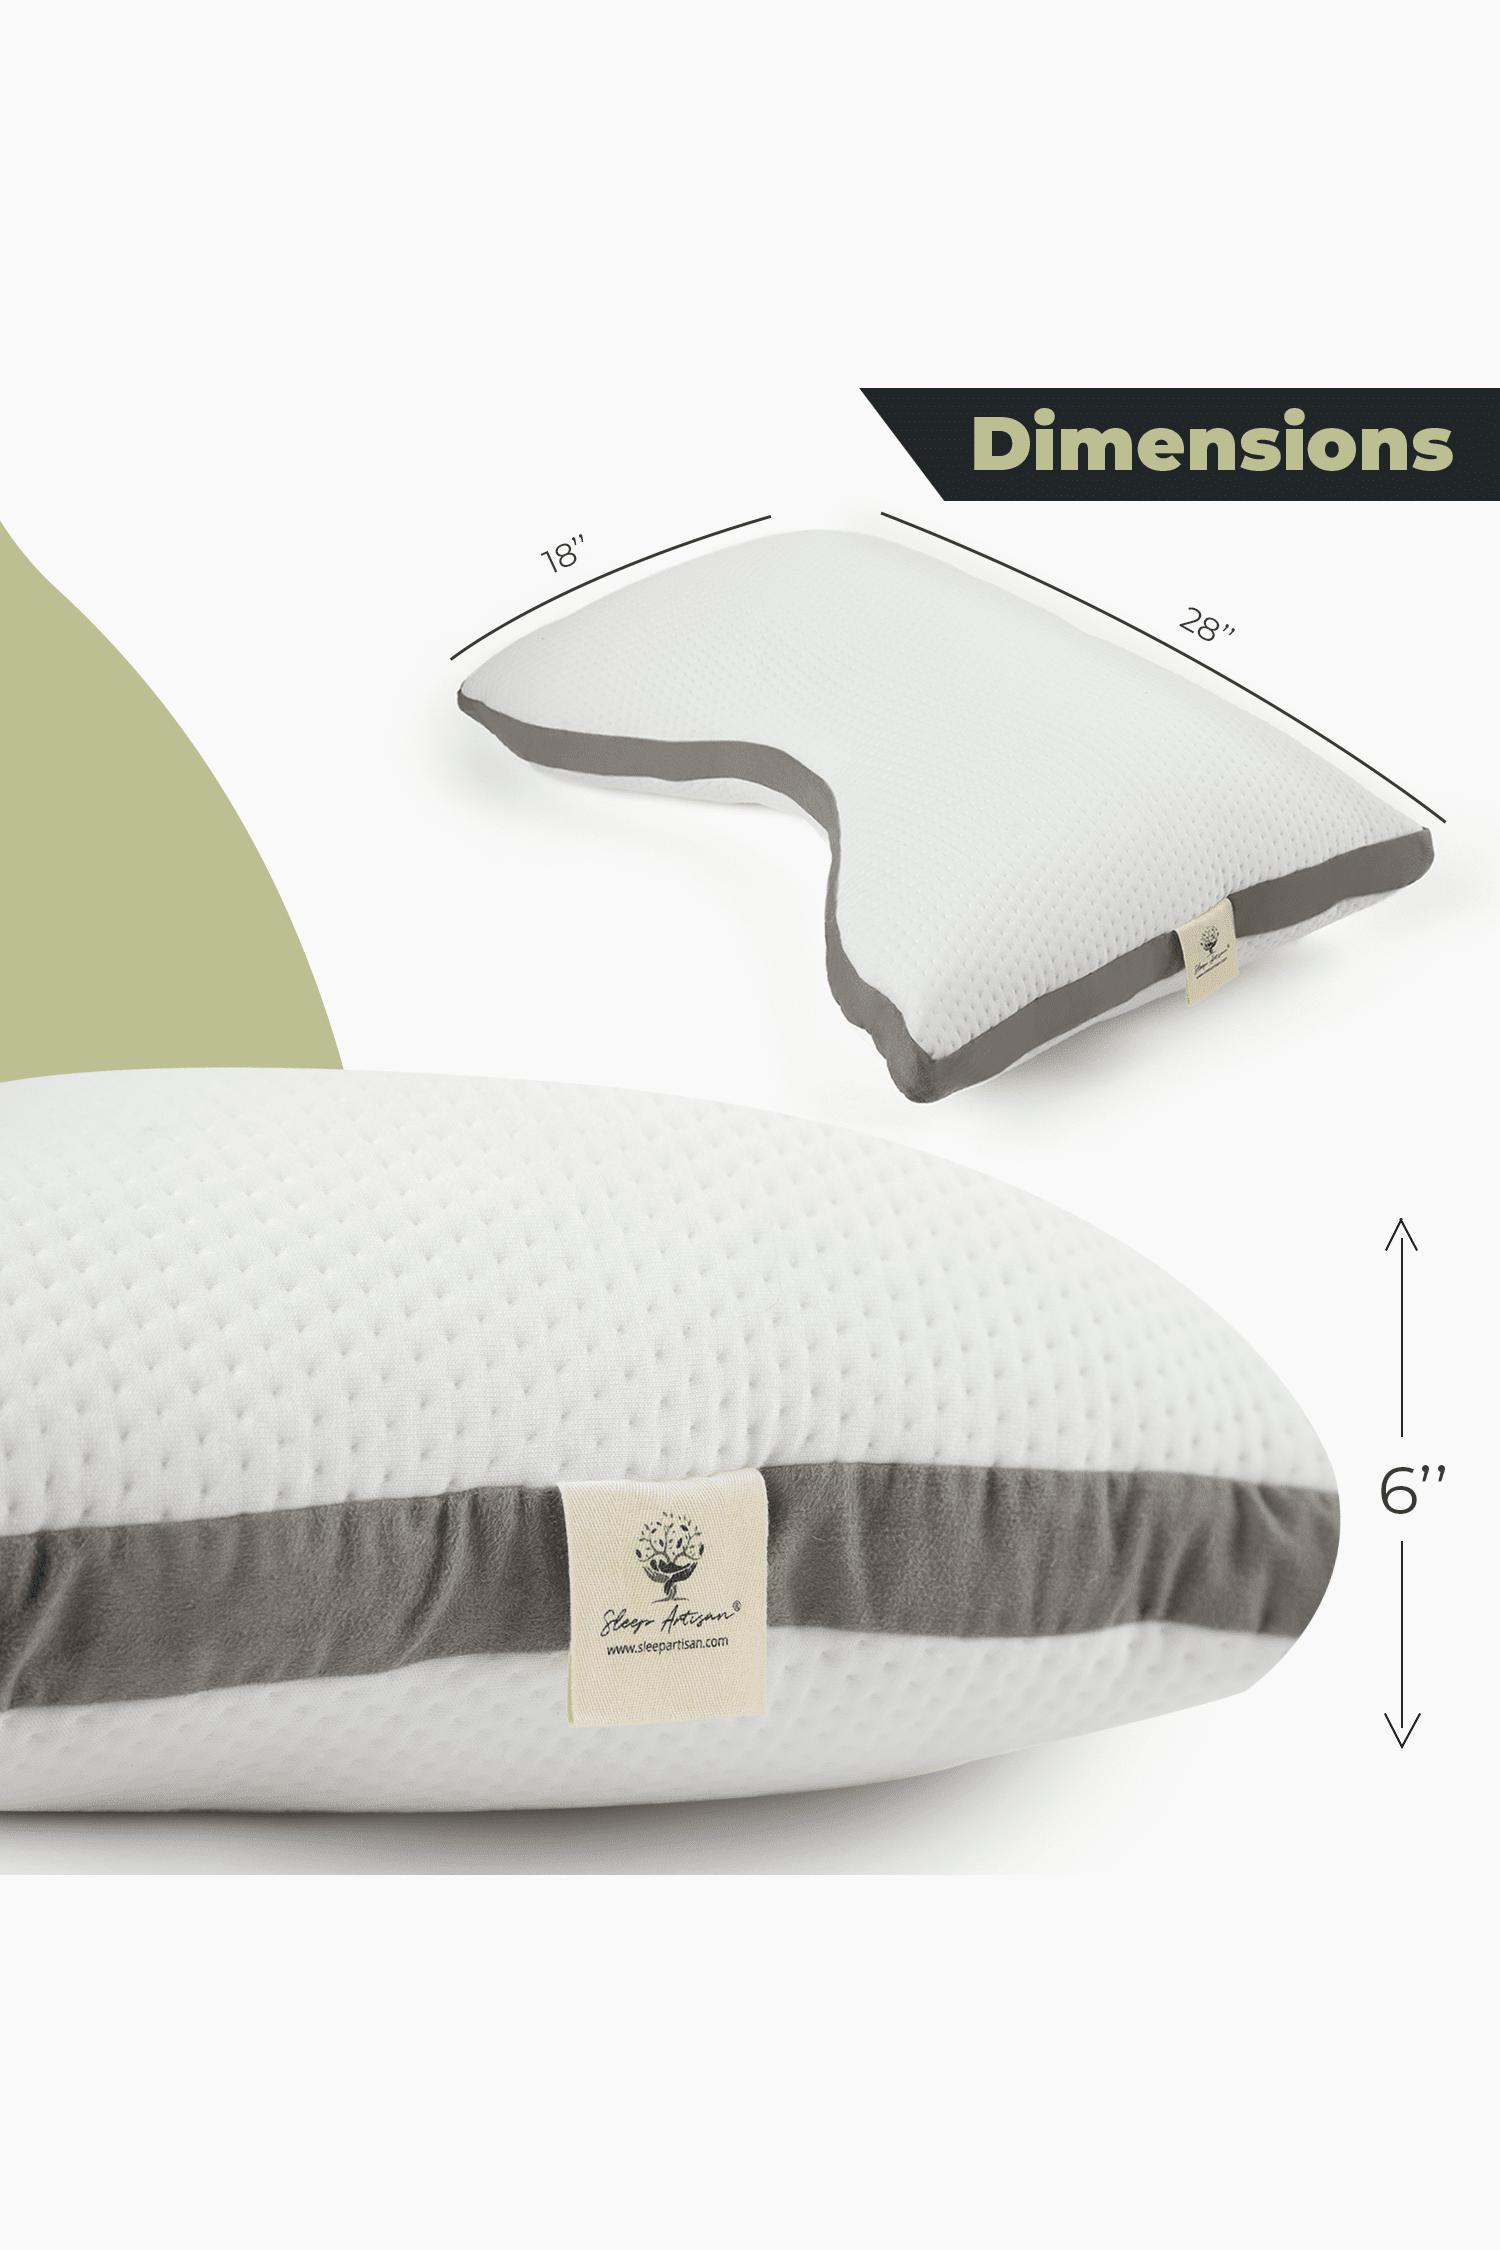 7 Best Pillows for Side Sleepers 2022 for Neck Relief